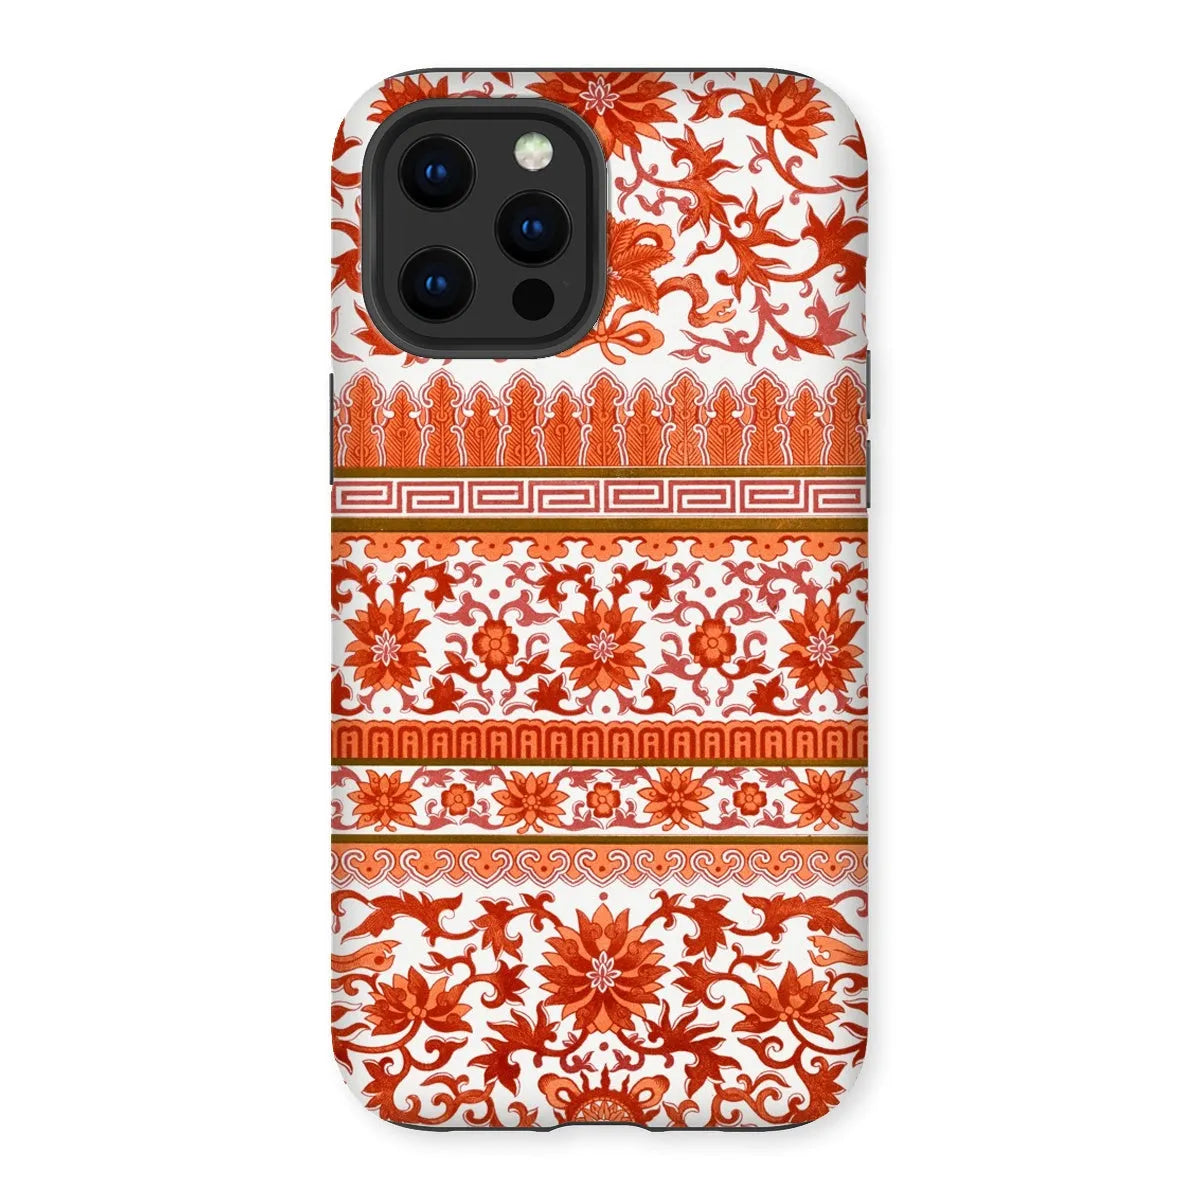 Fiery Chinese Floral Aesthetic Art Phone Case - Owen Jones - Iphone 13 Pro Max / Matte - Mobile Phone Cases - Aesthetic